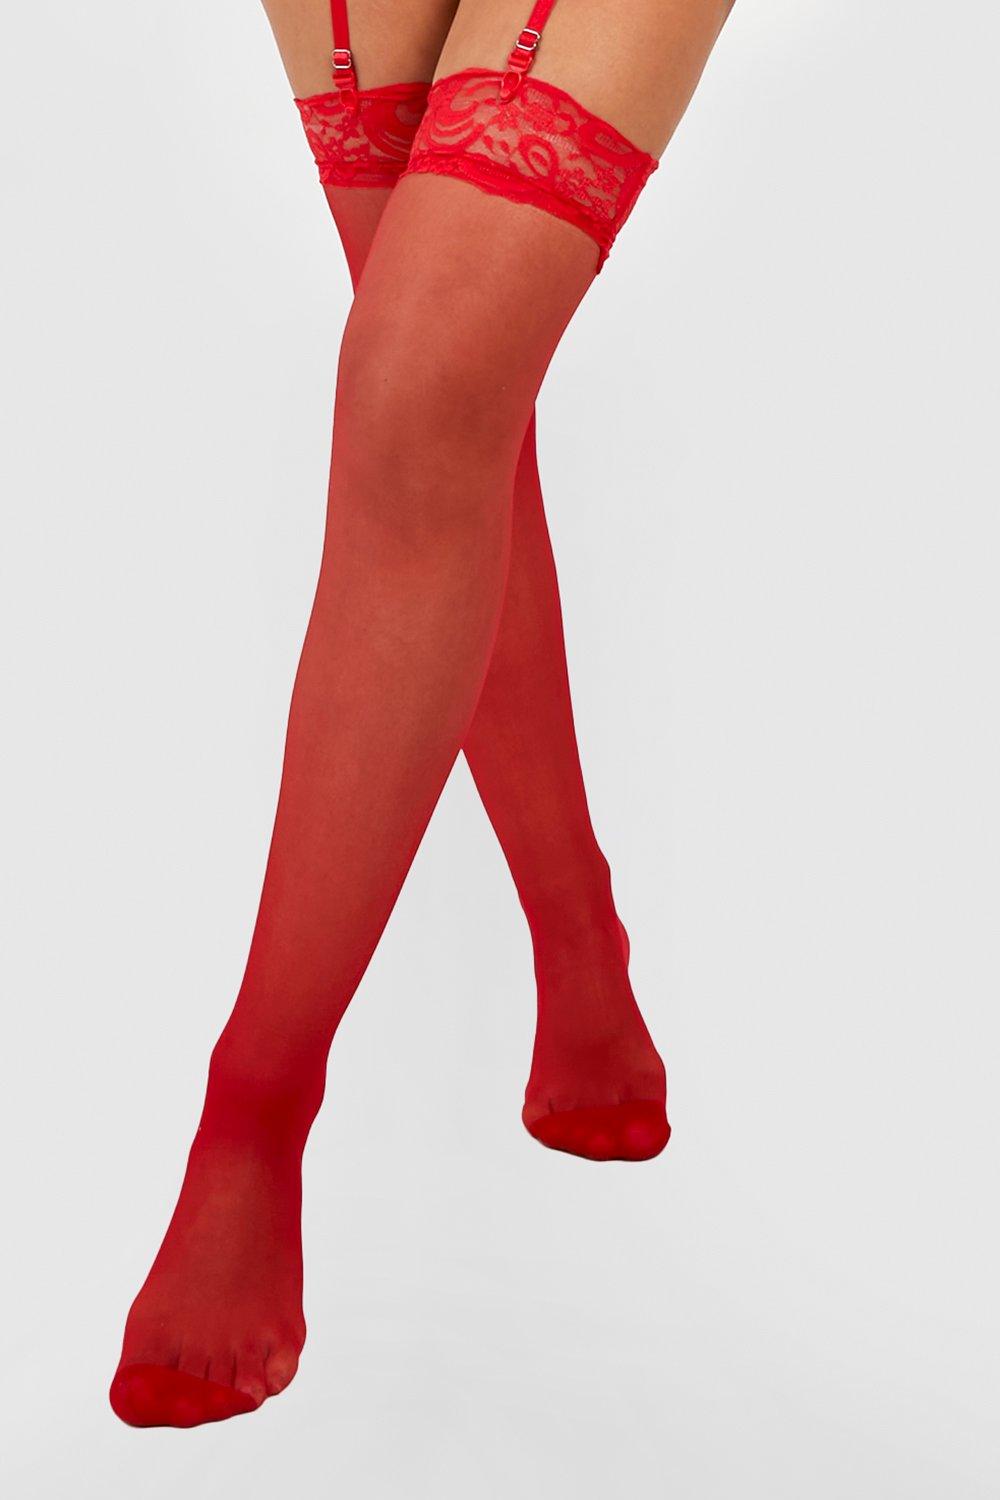 https://media.boohoo.com/i/boohoo/lzz00731_red_xl_1/female-red-lace-top-stockings